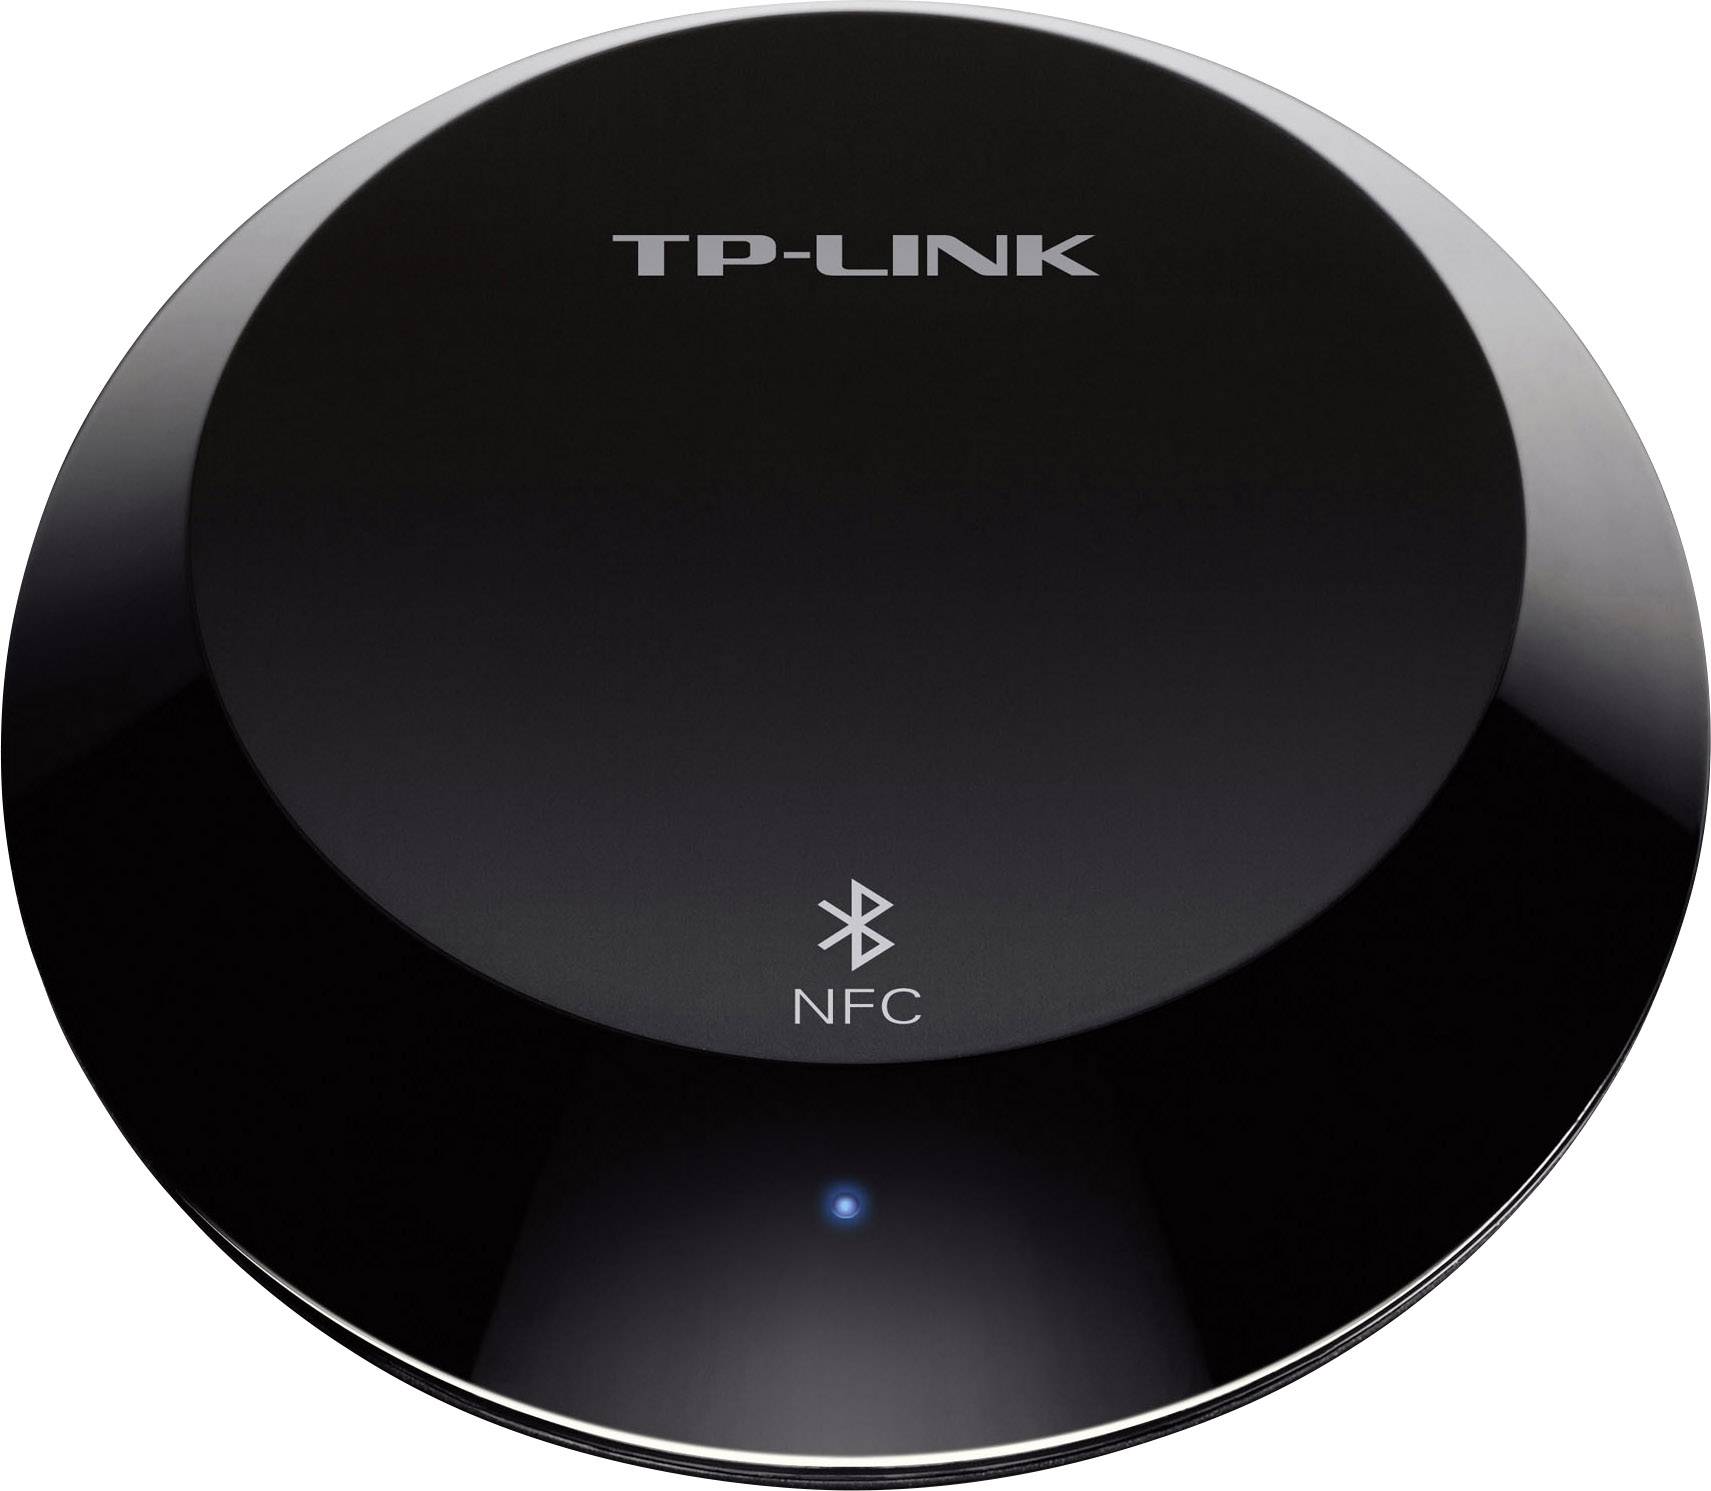 vmware player and tplink wifi